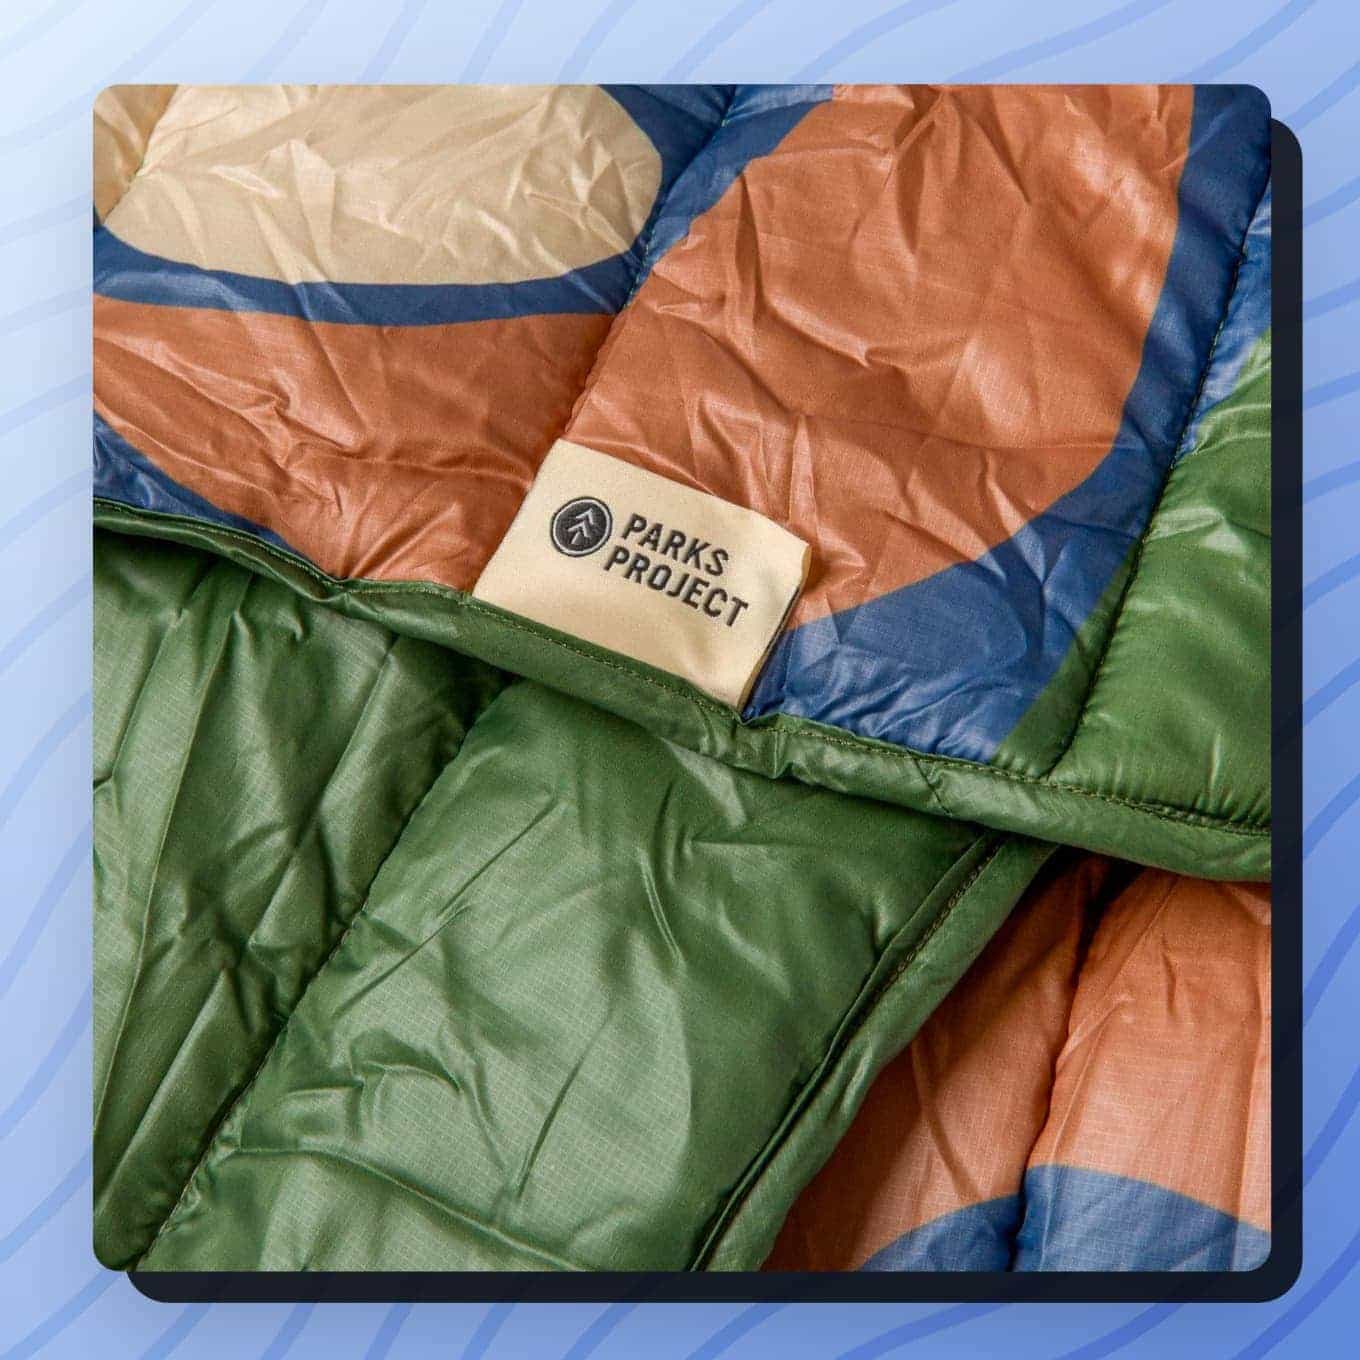 Closeup view of puffy blanket with a Parks Project label